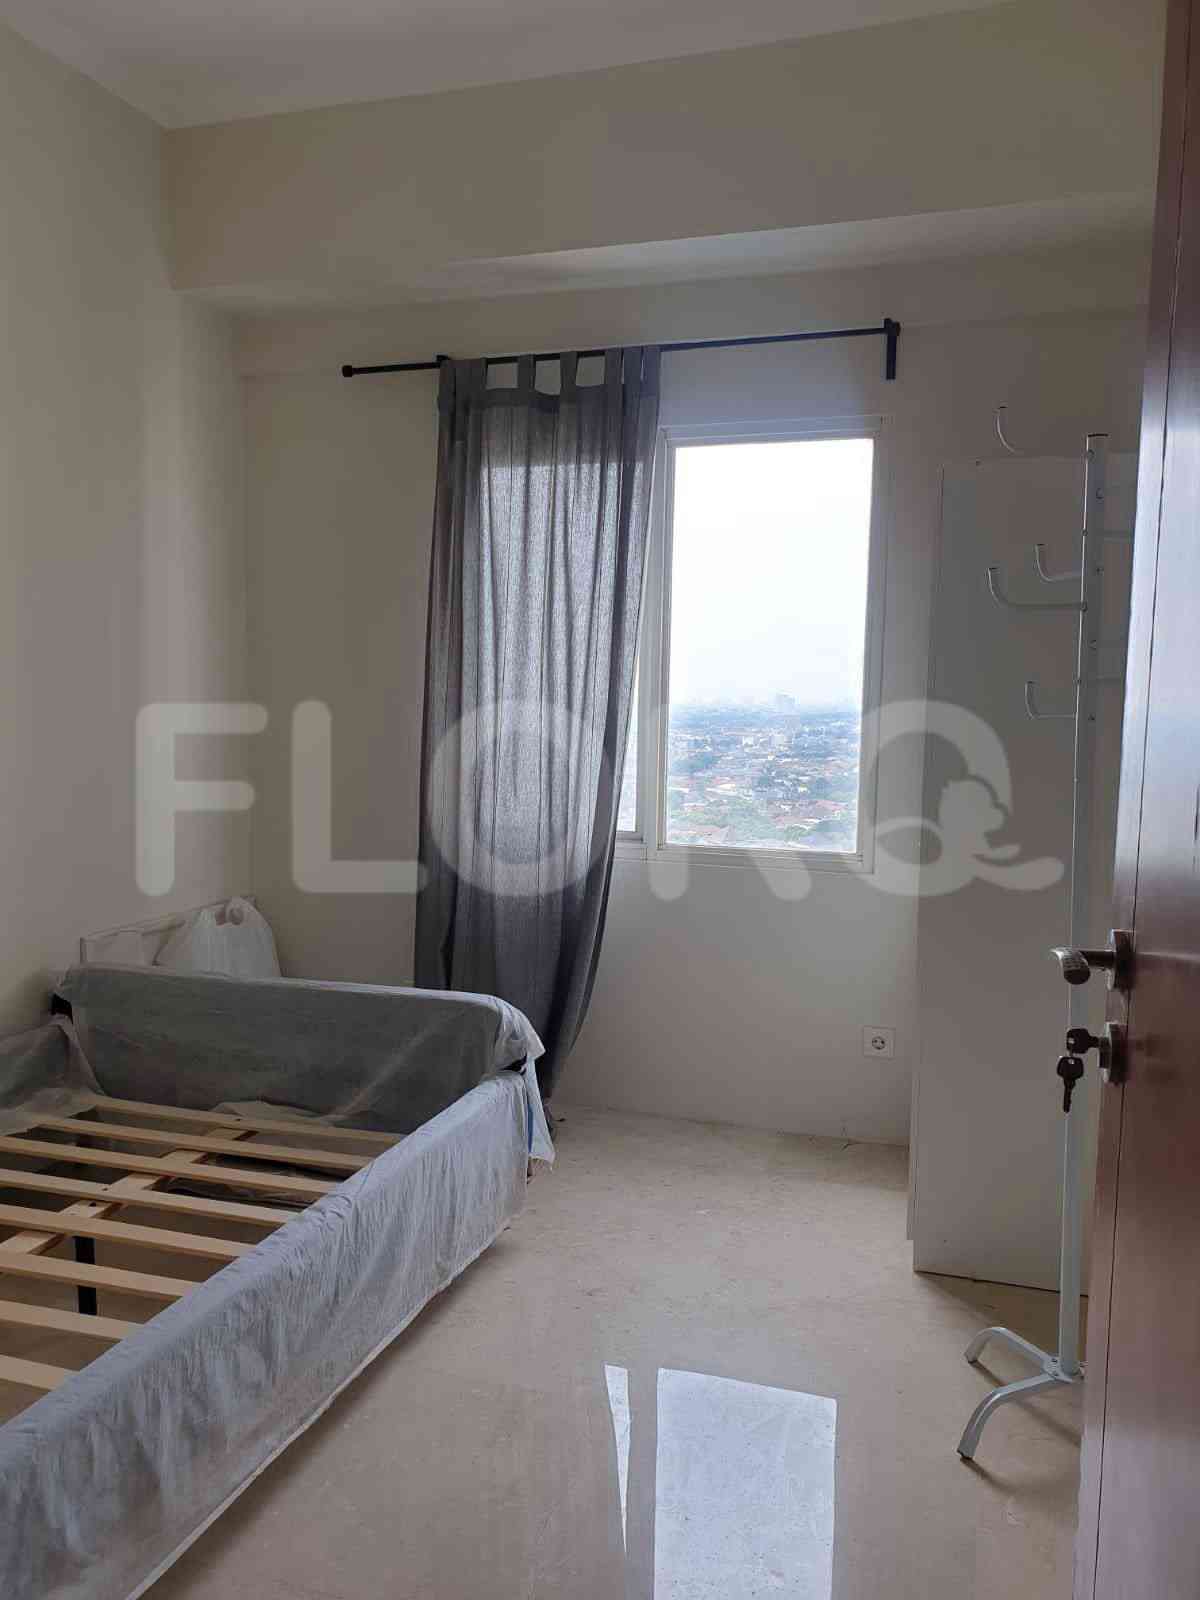 3 Bedroom on 21st Floor for Rent in Poins Square Apartment - fle361 8